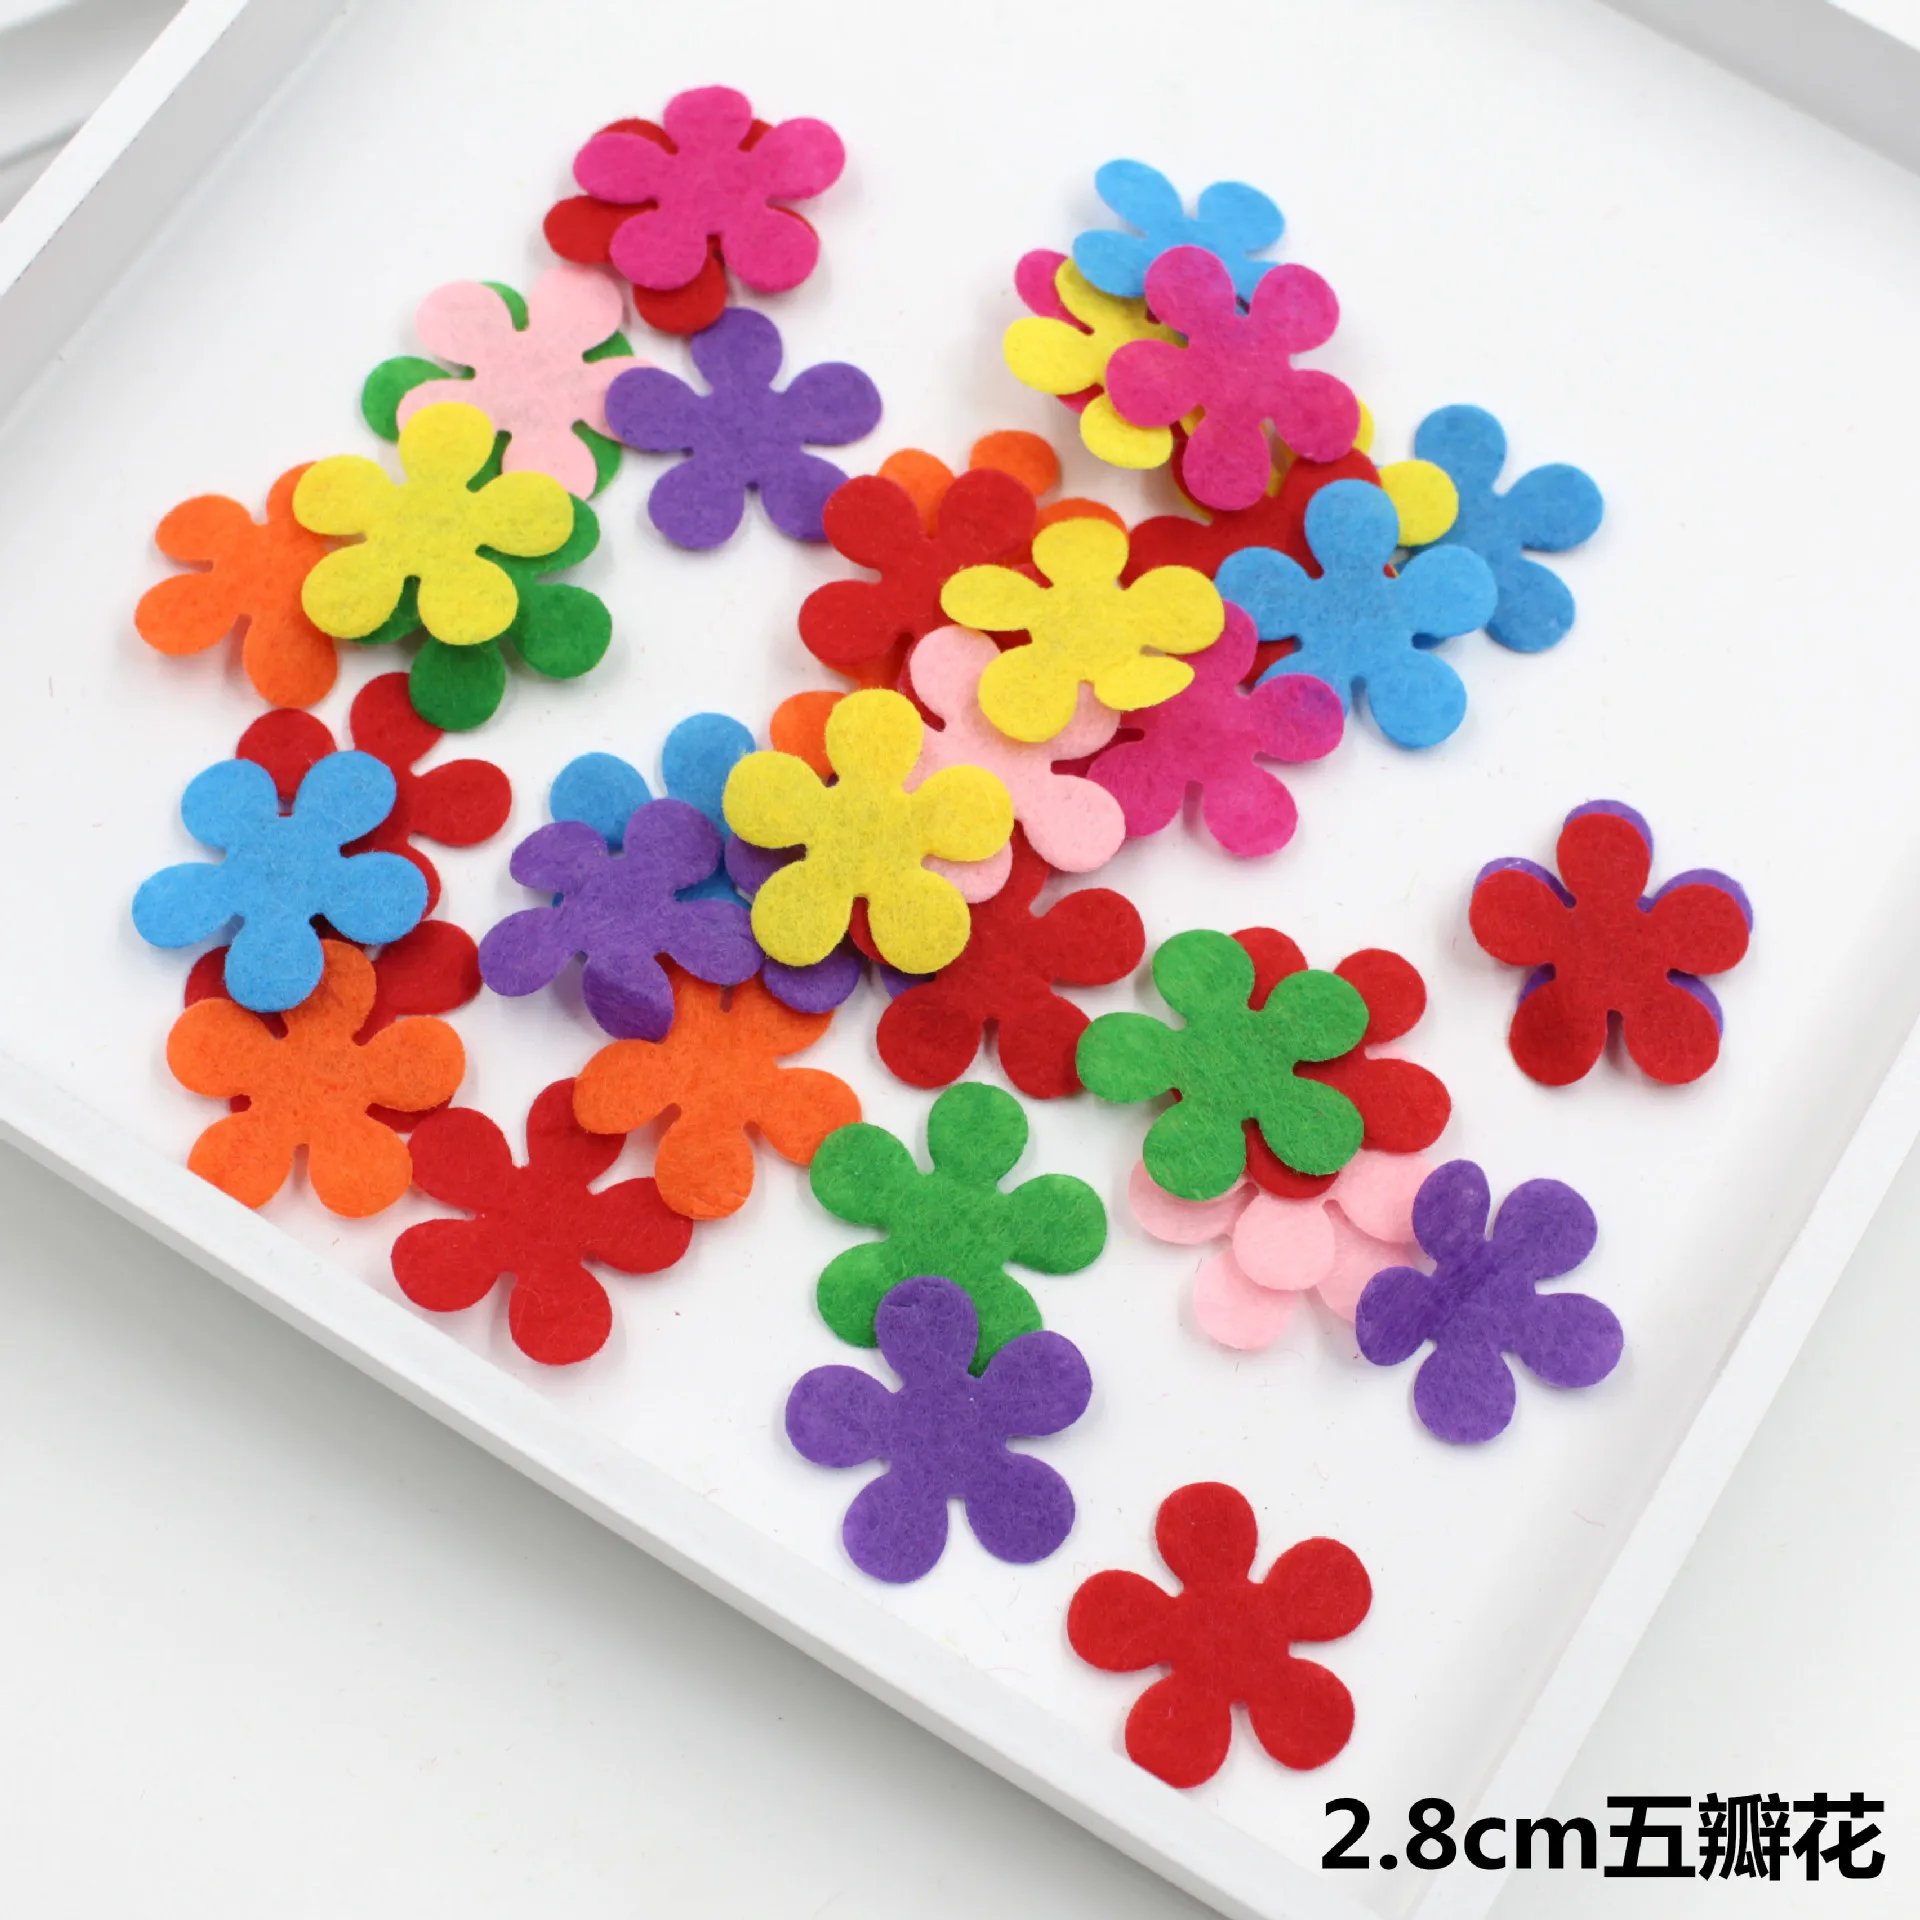 XICC 100PCS Colorful Nonwoven Round Flower Wool Felt Fabric Hair rope DIY Handmade Accessory Sticker Applique Patches Felt Pad - Цвет: 1-26